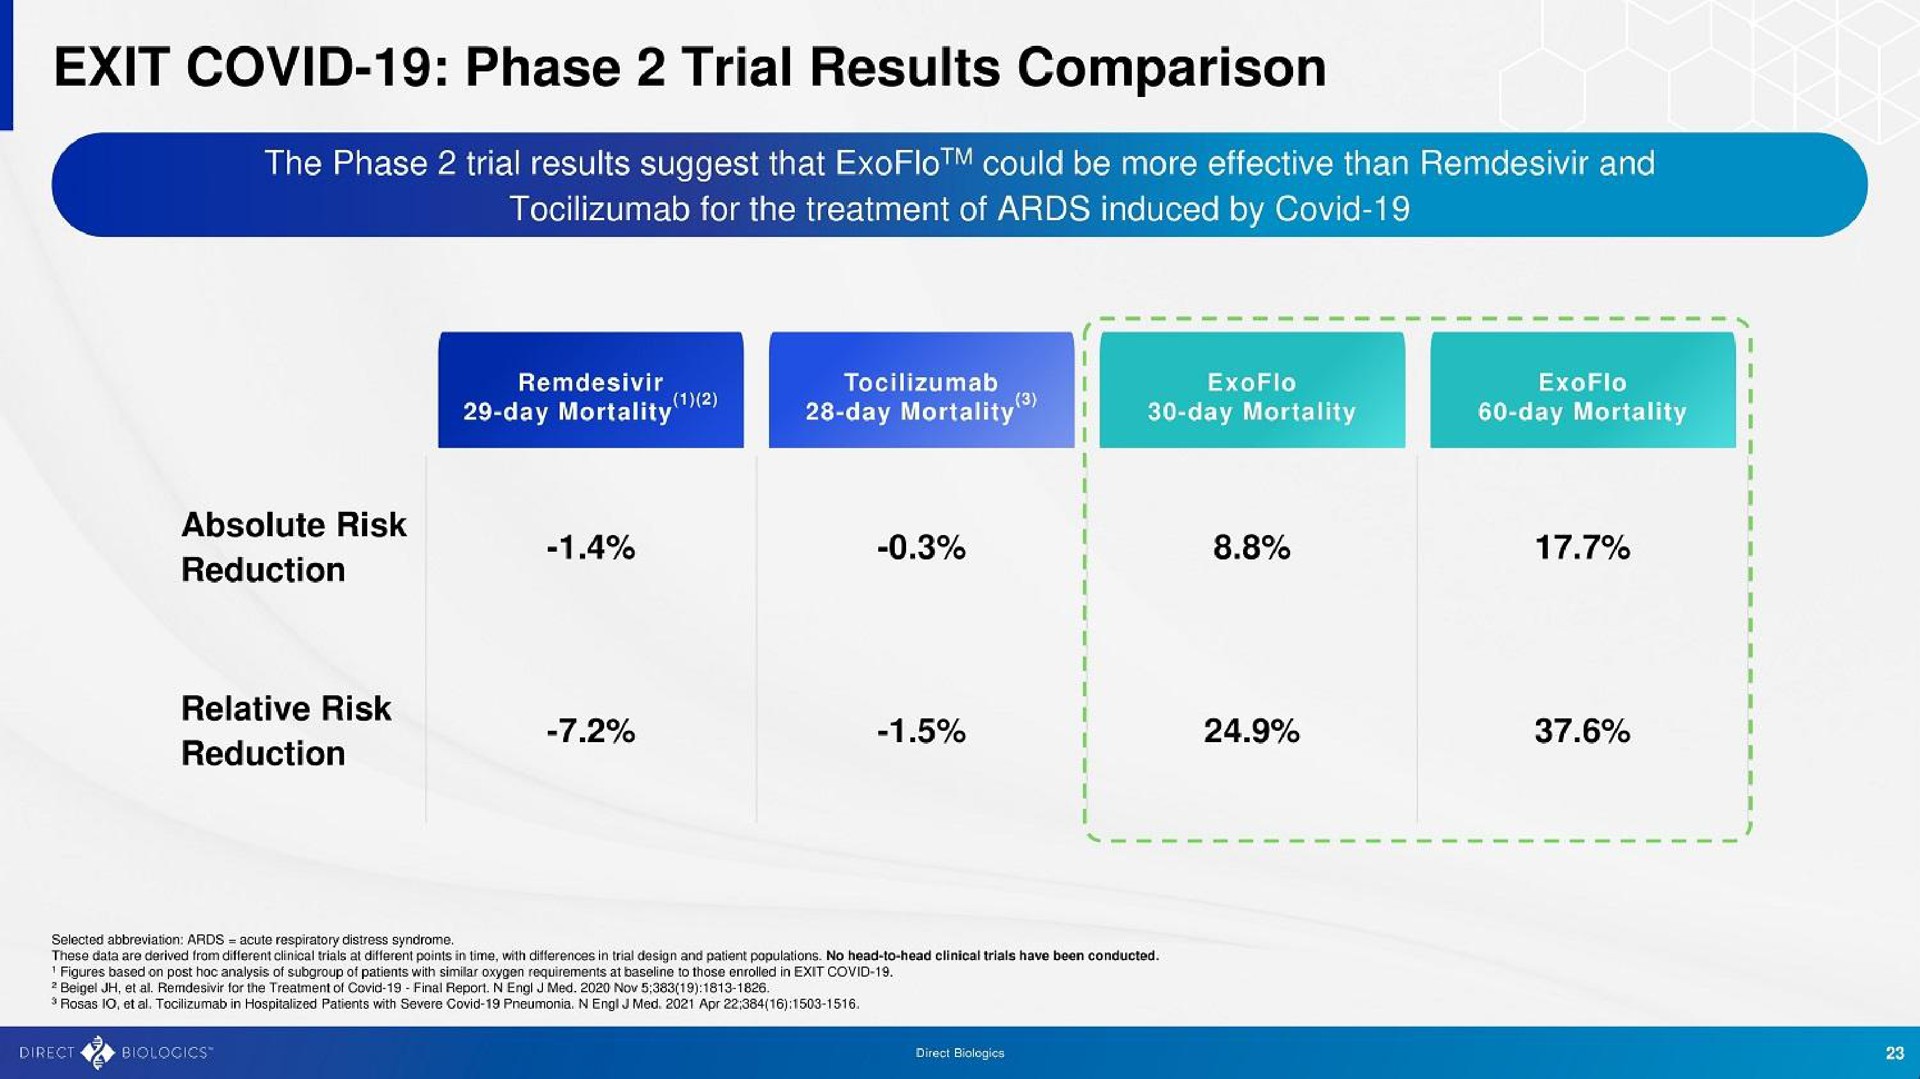 exit covid phase trial results comparison | Direct Biologics